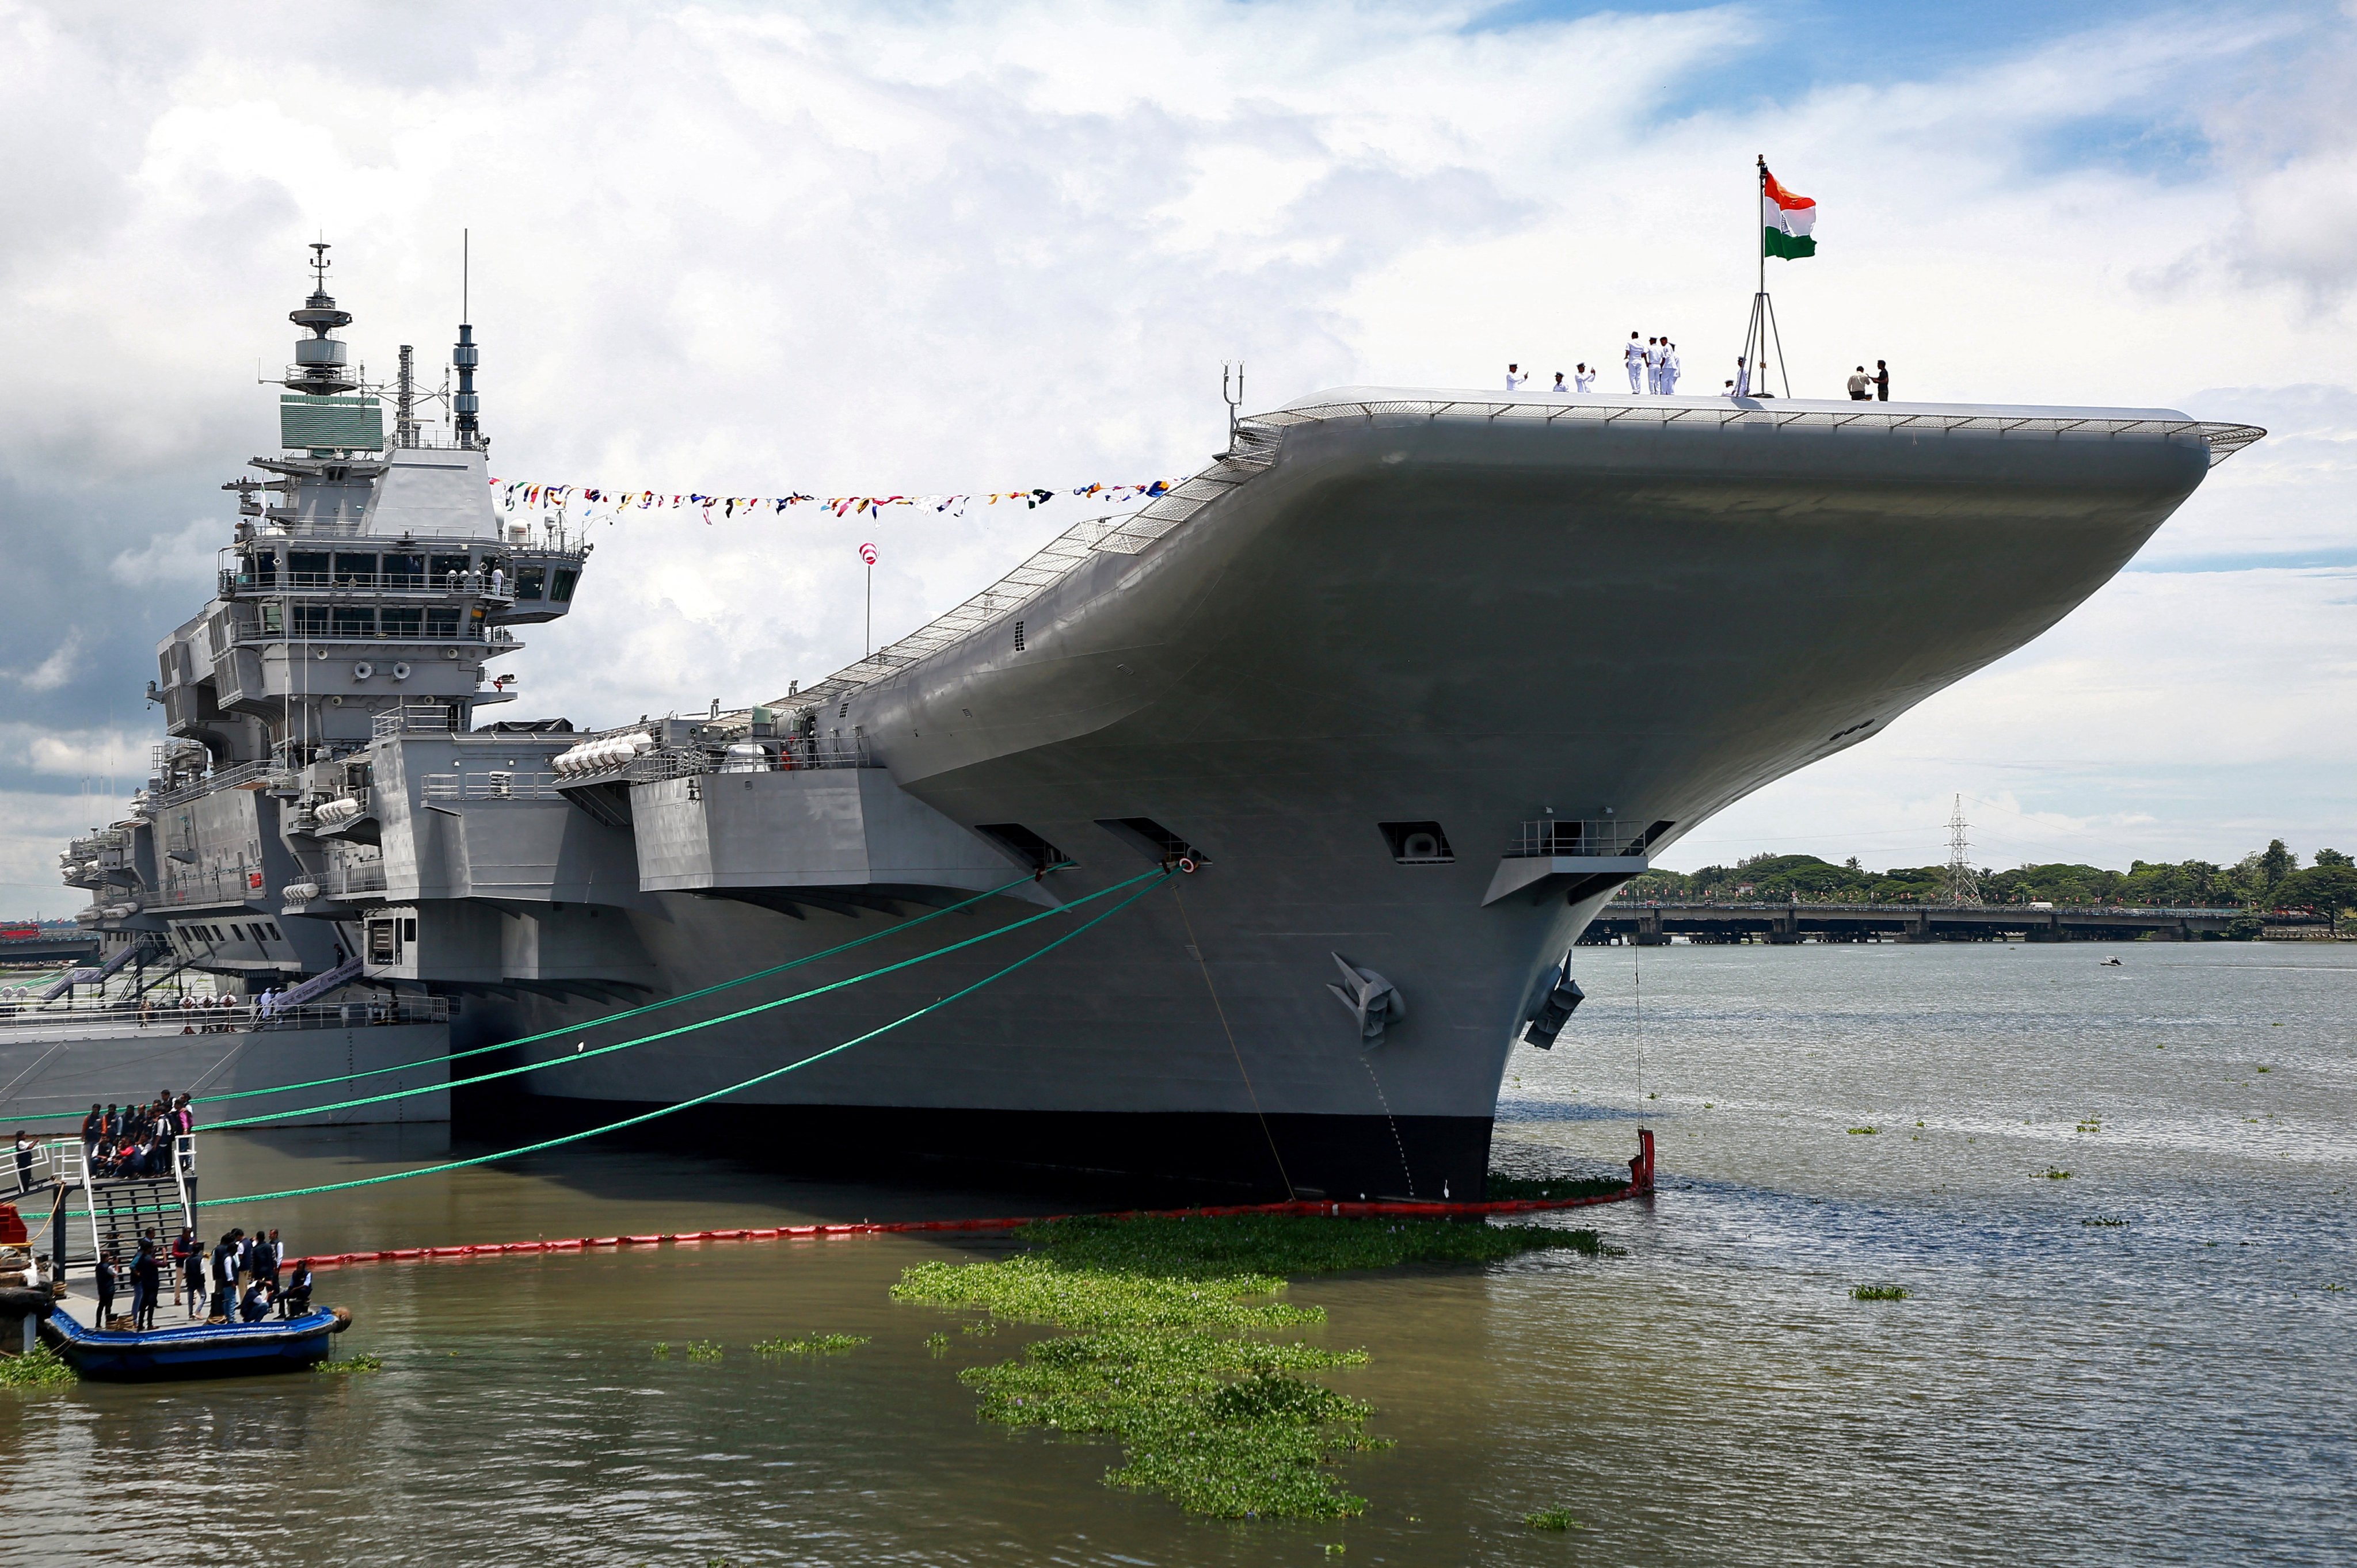 Indian Navy officers stand on the flight deck of India’s first home-built aircraft carrier INS Vikrant after its commissioning ceremony at a state-run shipyard in Kochi, India, on September 2. Photo: Reuters